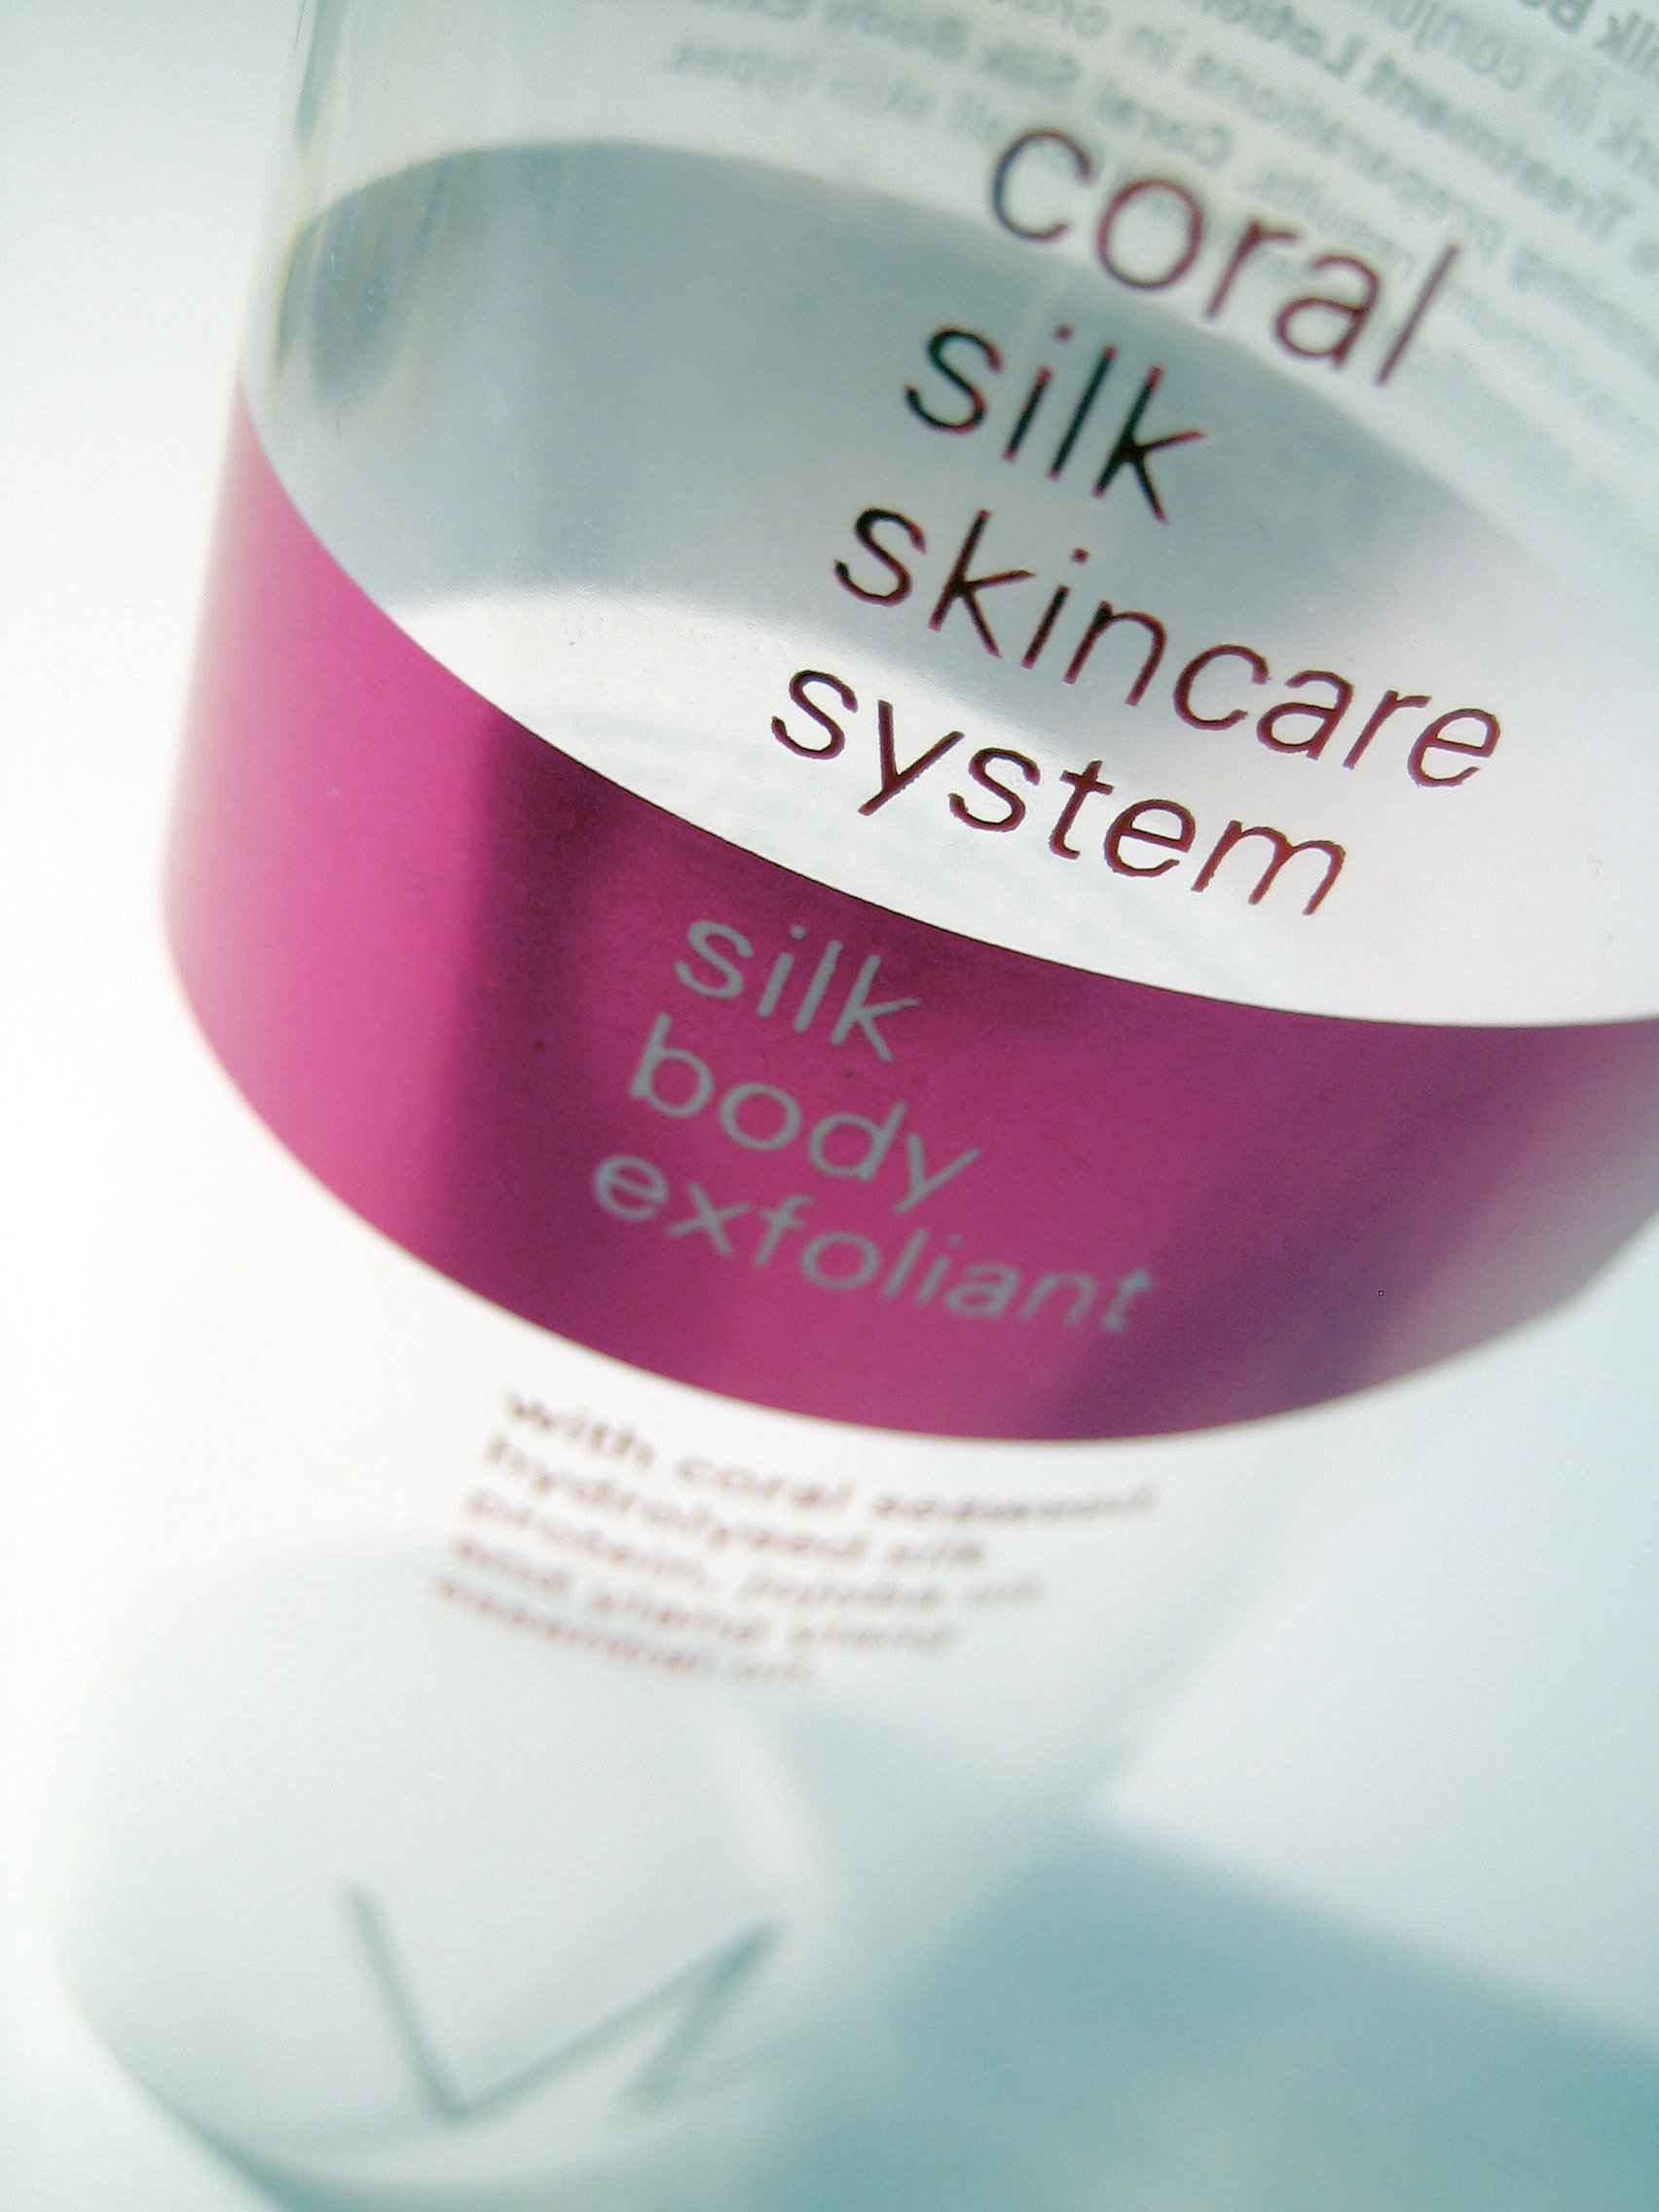 Coral Silk Skincare System health & beauty product labels manufactured by Premier Labels UK